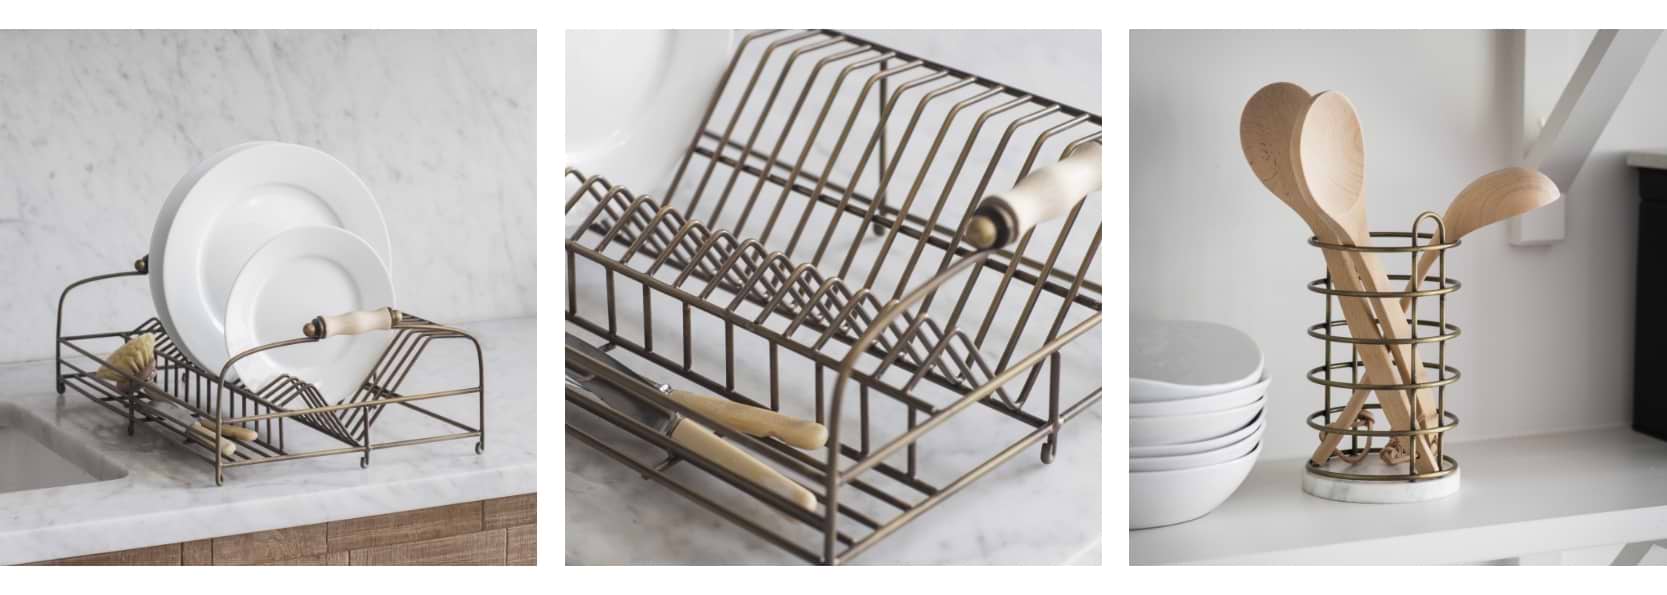 Brompton Dish Rack and Utensil Holder in antique brass, featuring a wirework frame with wooden handles, holding plates and cutlery.